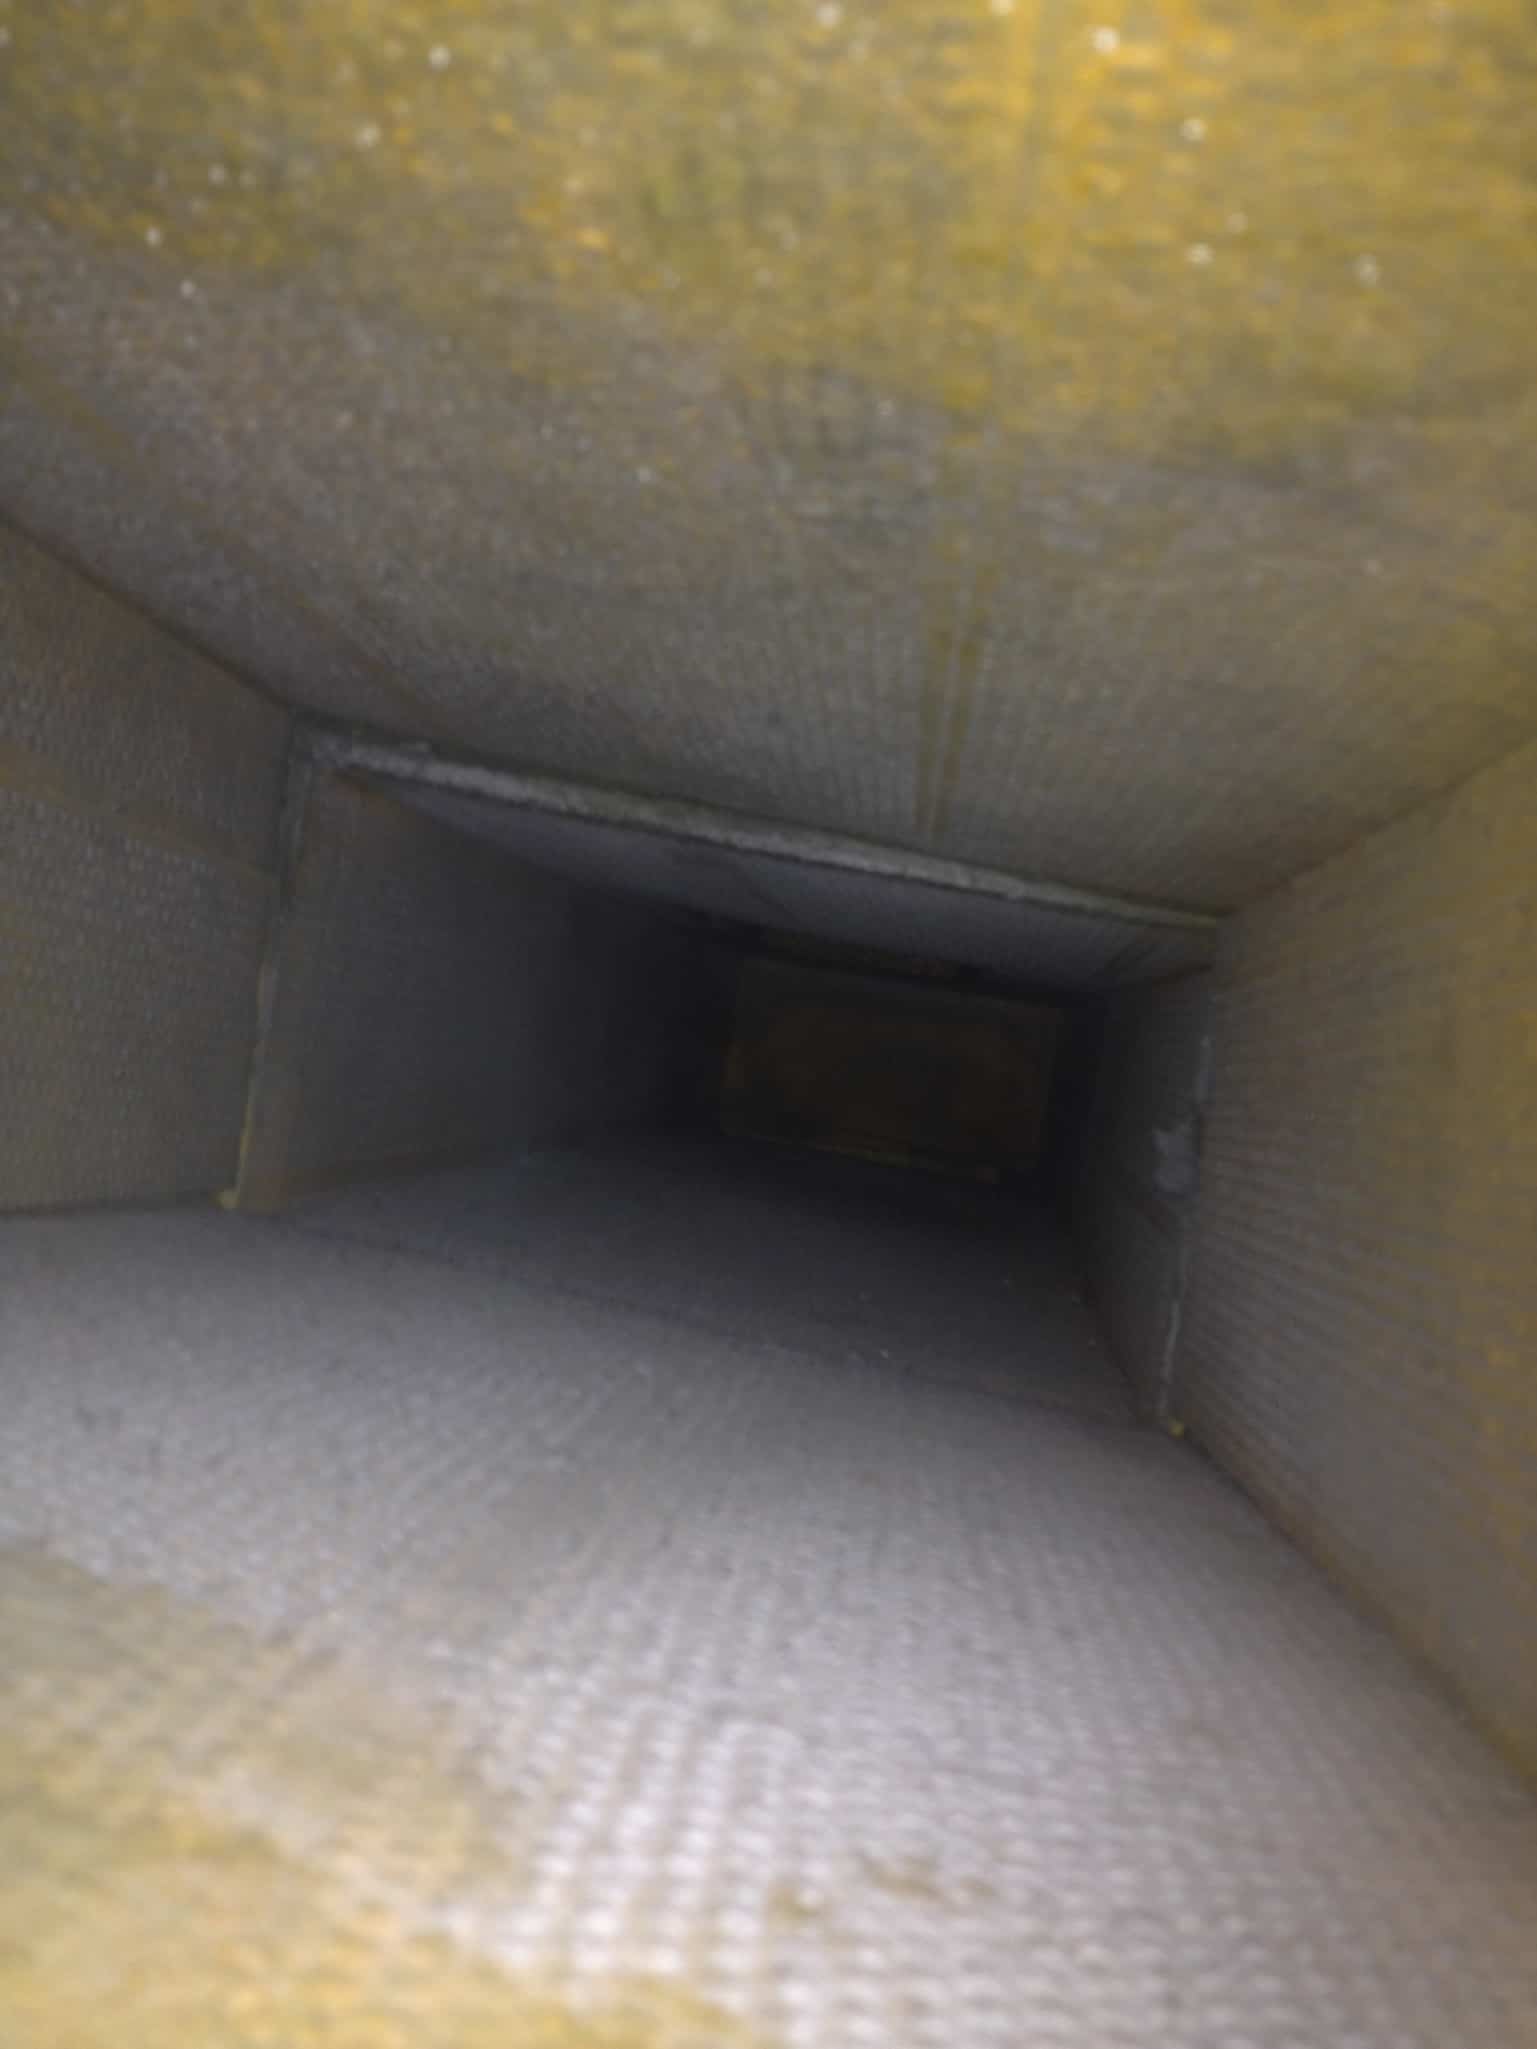 Commercial Air Duct Cleaning services in Phoenix, AZ